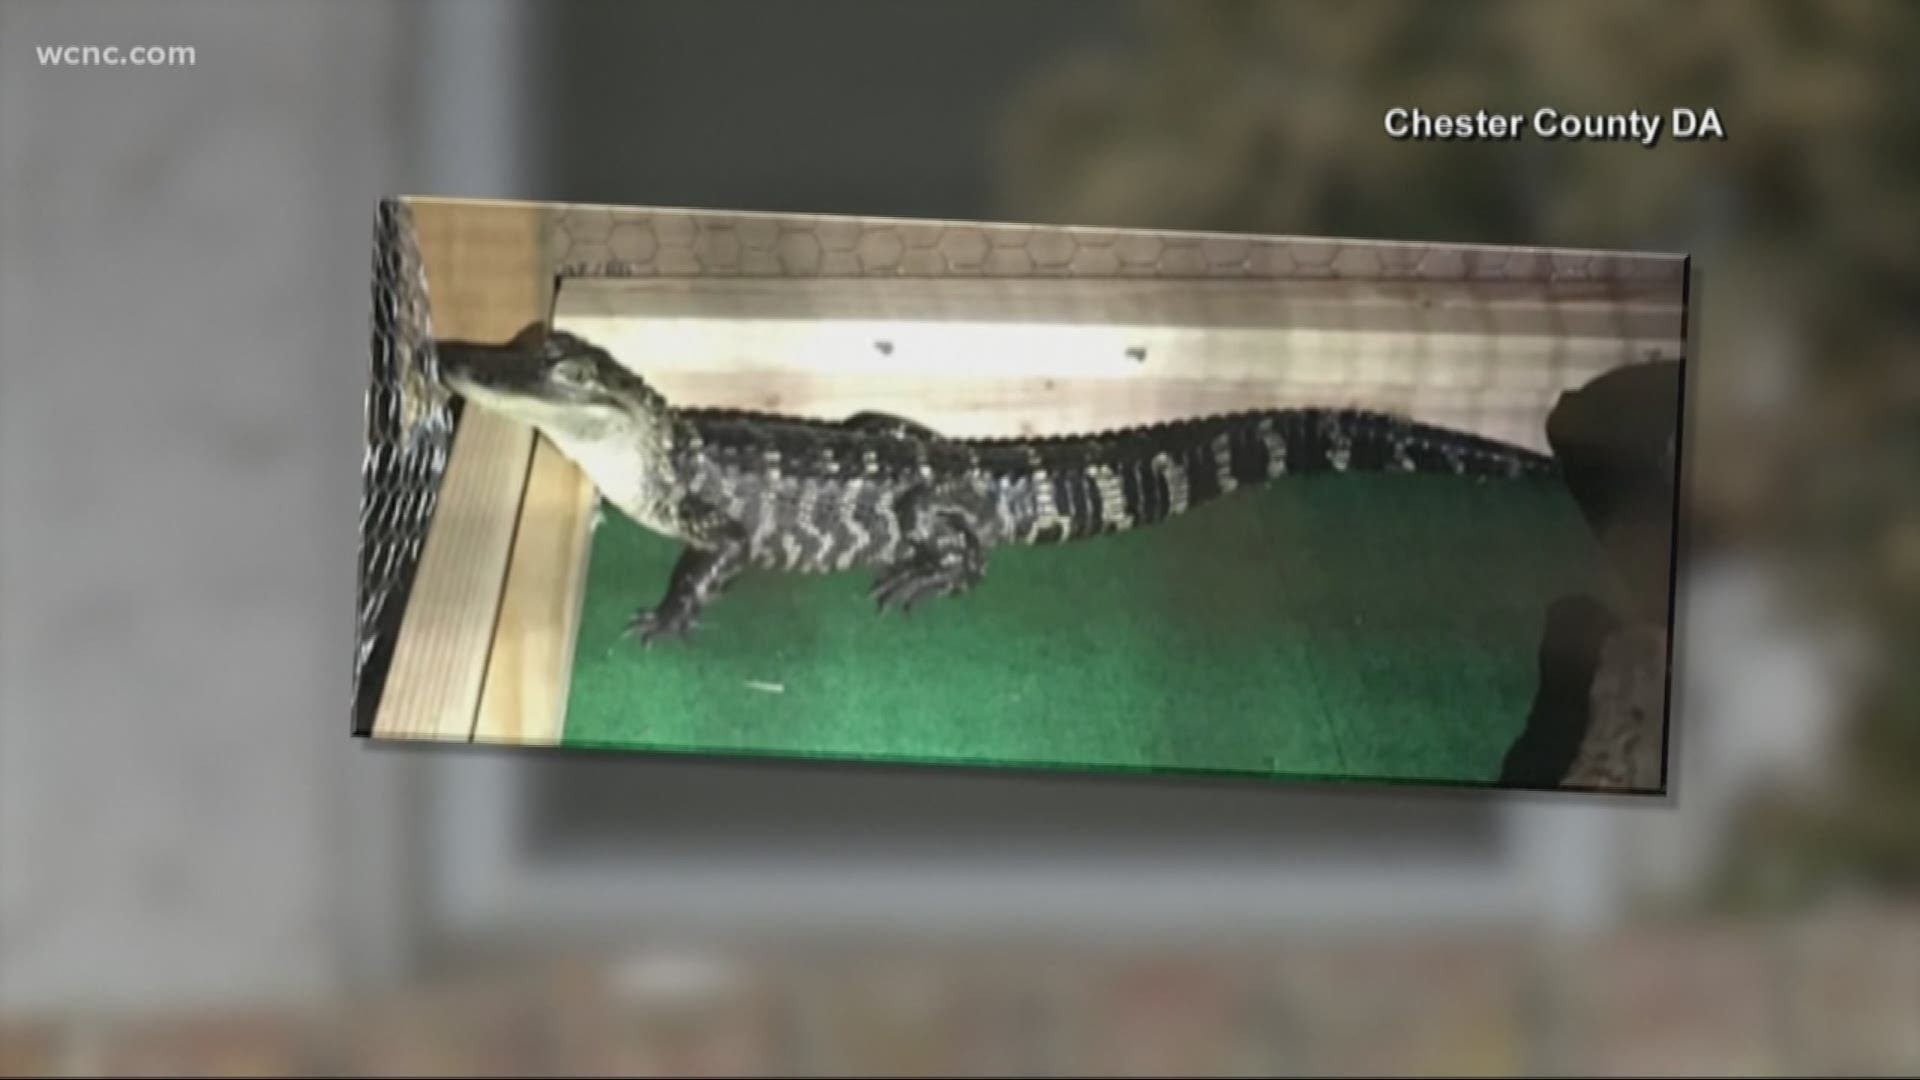 On top of recovering heroin, crack cocaine, fentanyl and $5,000, they also found a three-foot alligator hanging out in the kitchen of the house, according to a press release issued by the Chester County District Attorney’s Office. They nicknamed him "El Chompo."